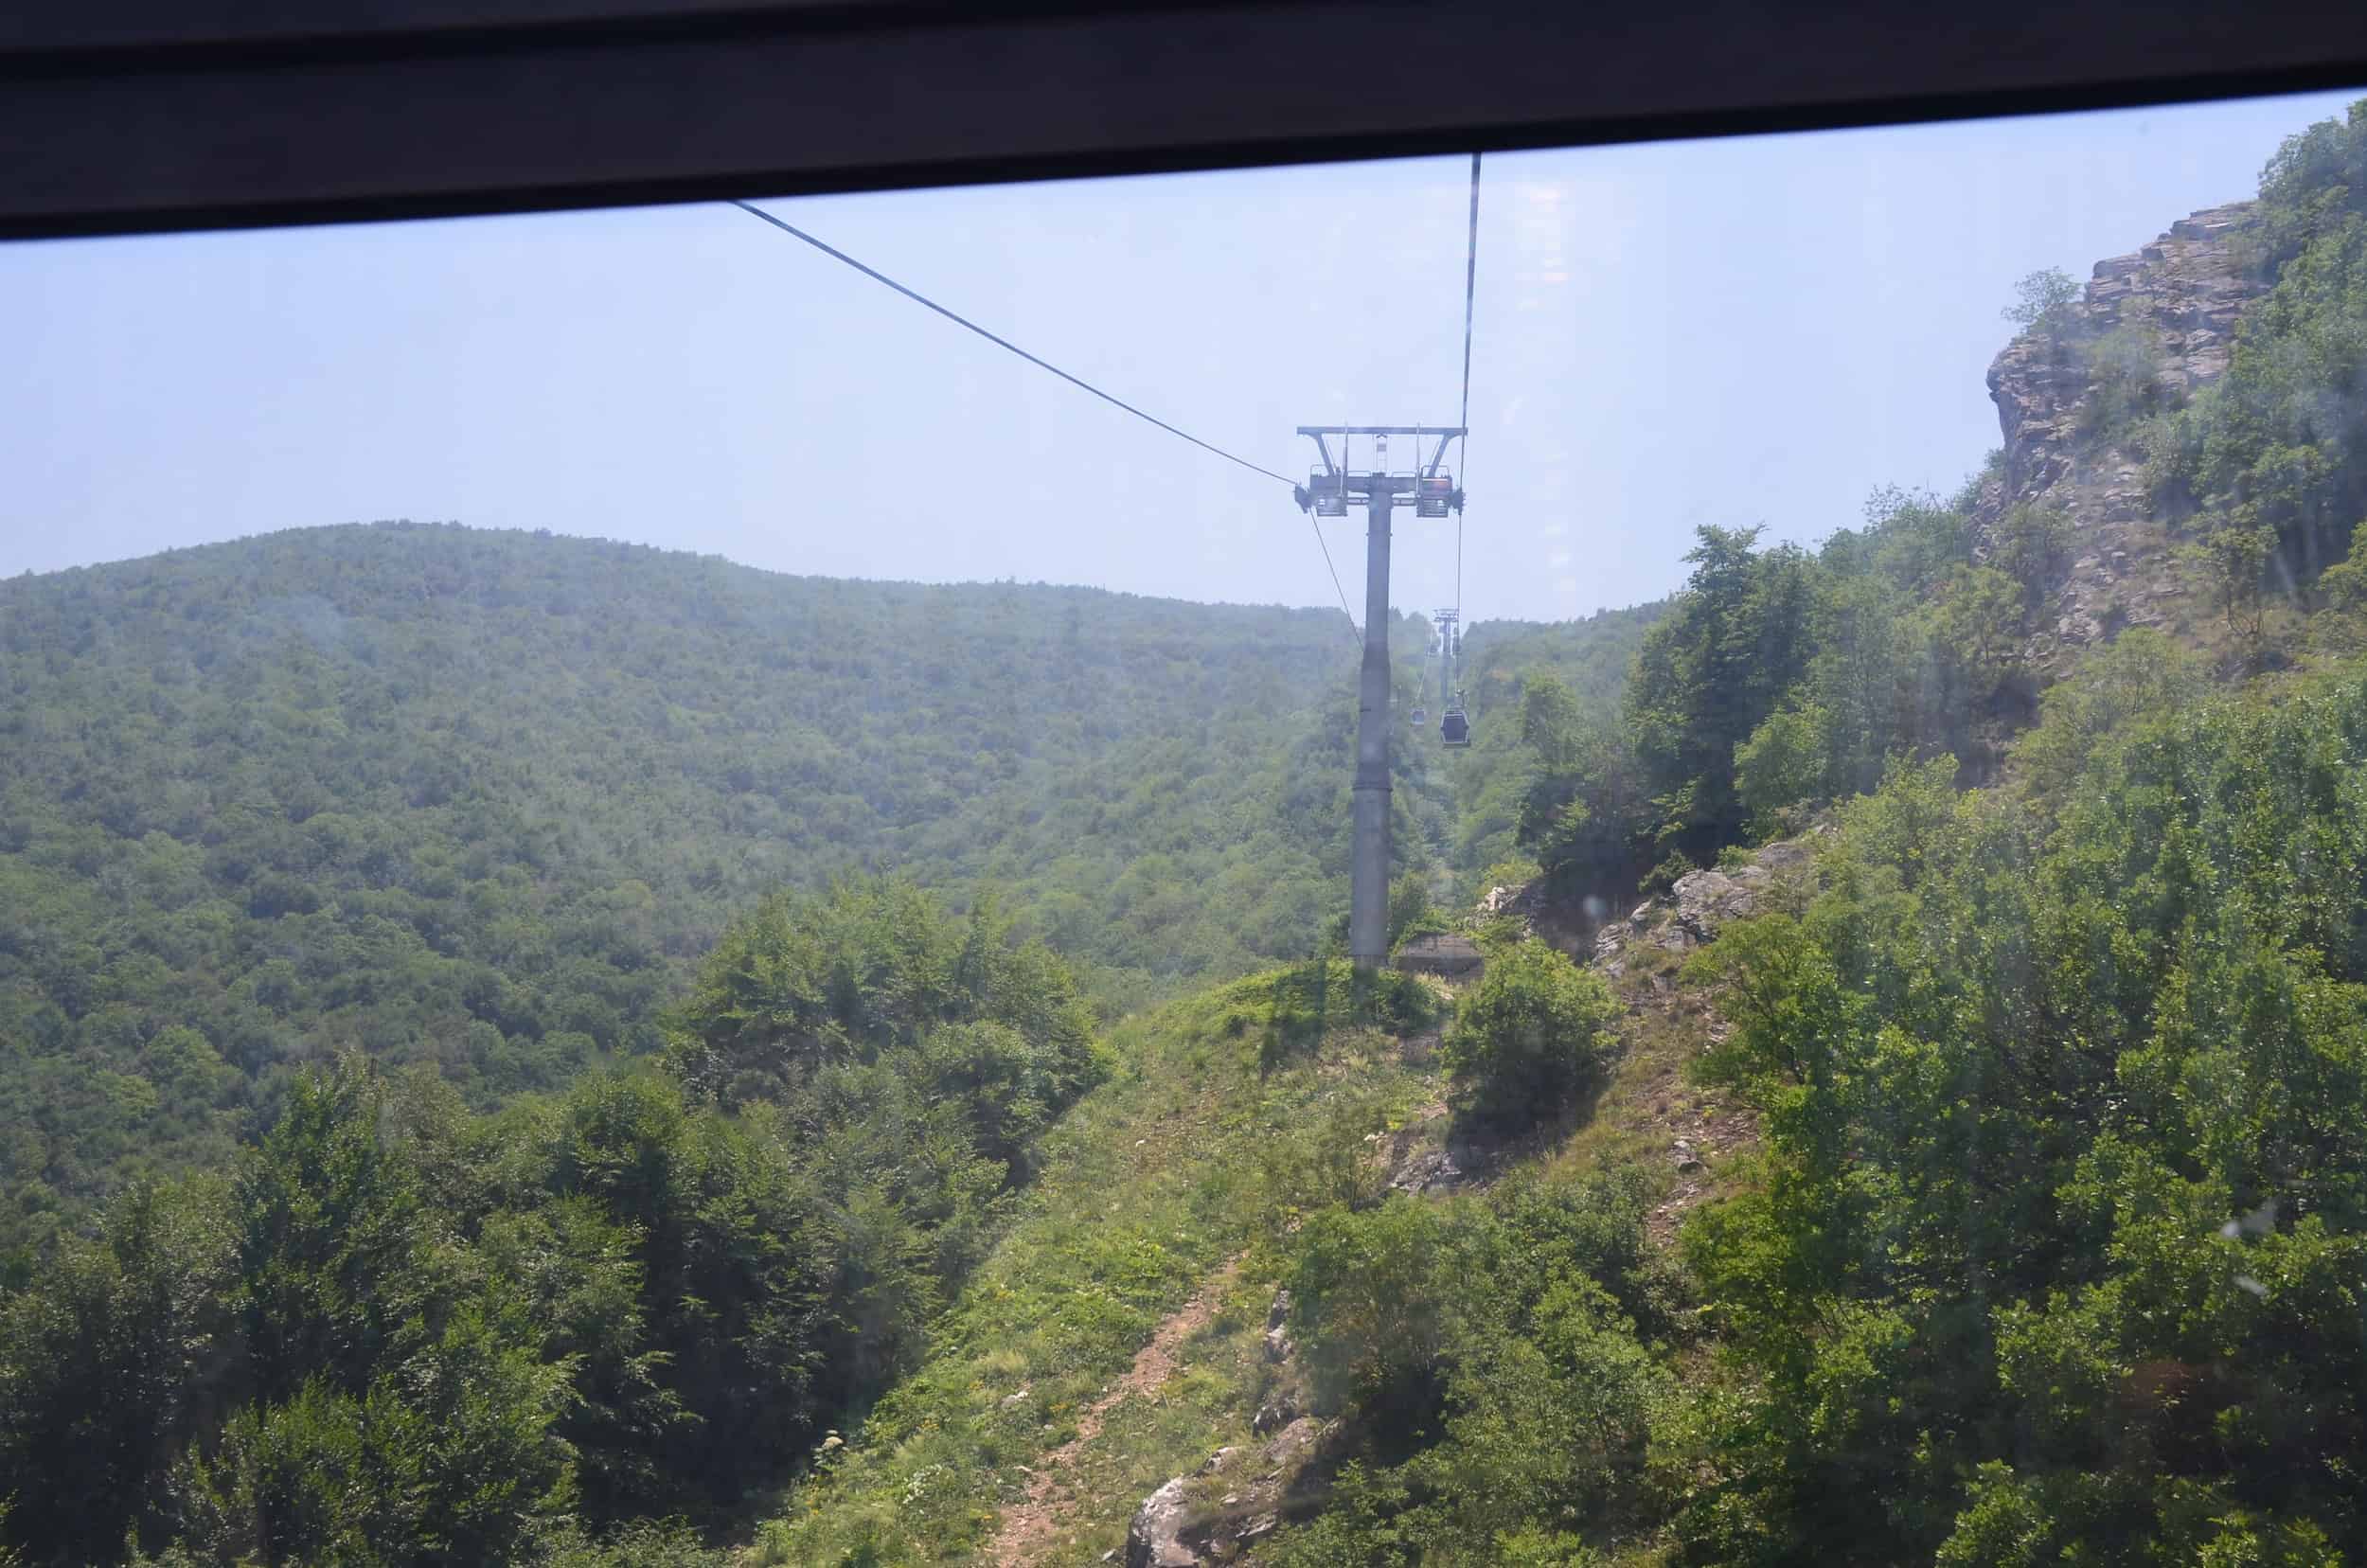 Riding the cable car at Uludağ National Park